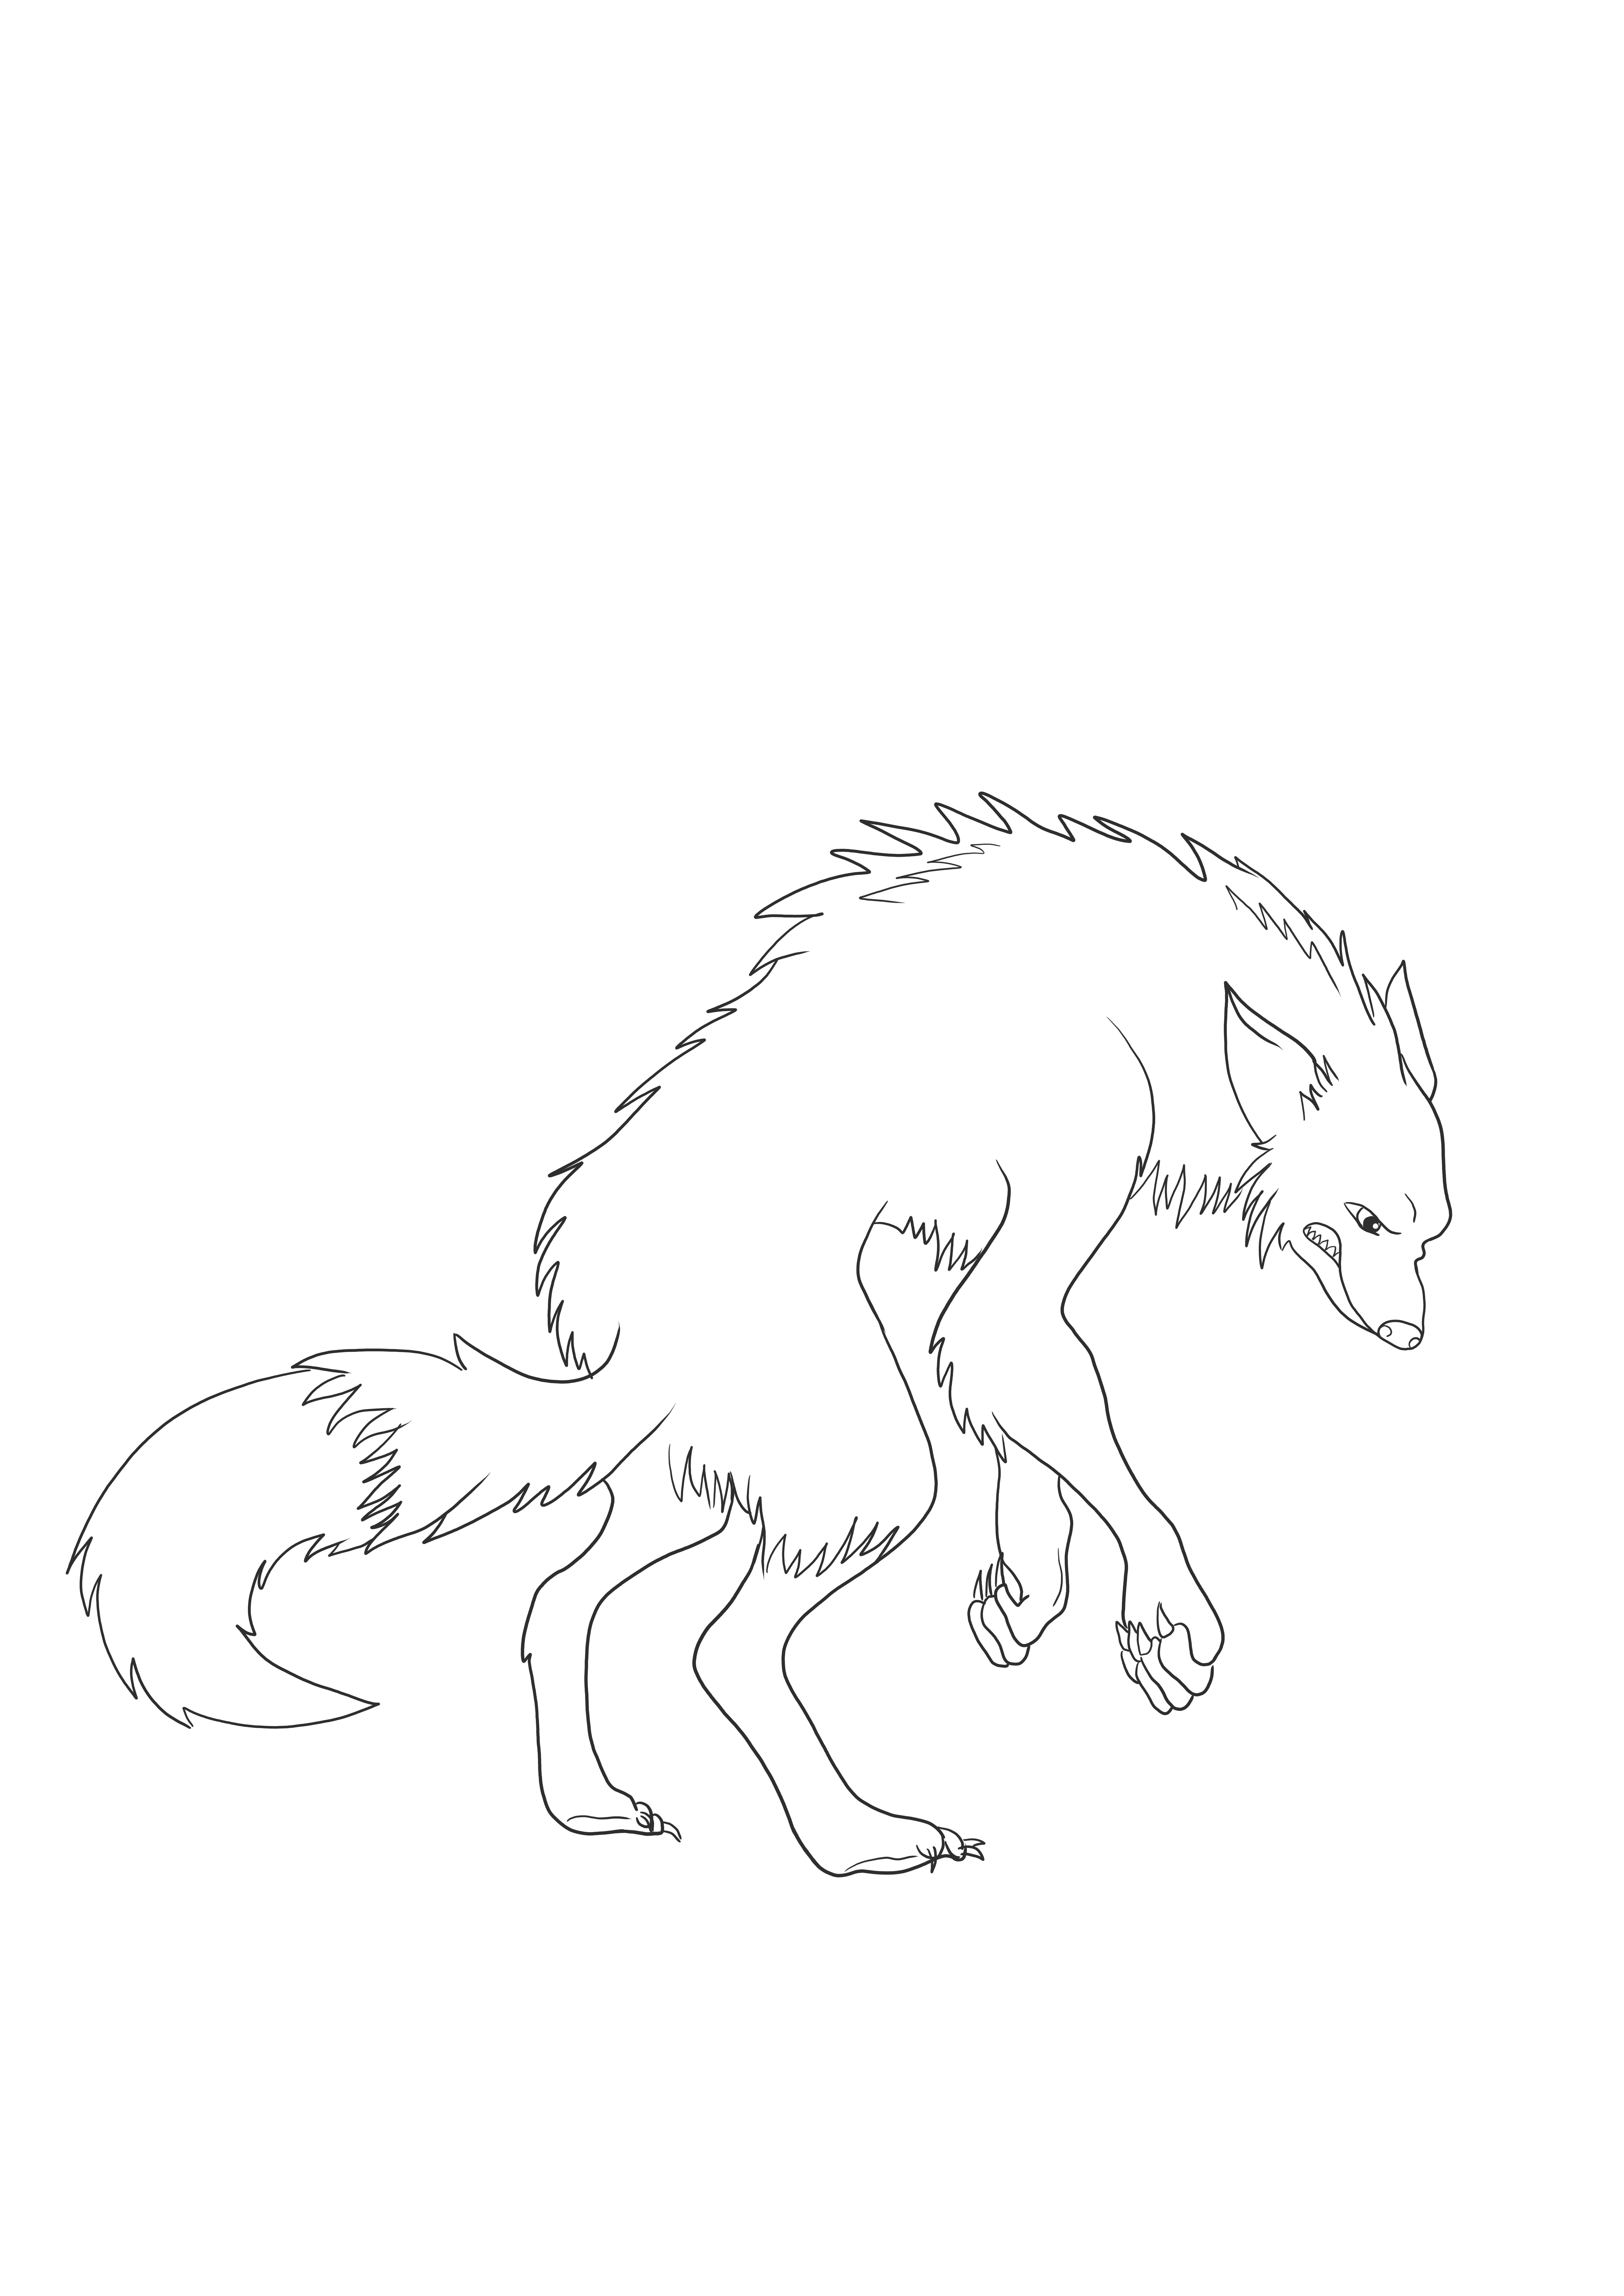 Scary werewolf free downloading or printing for kids to color